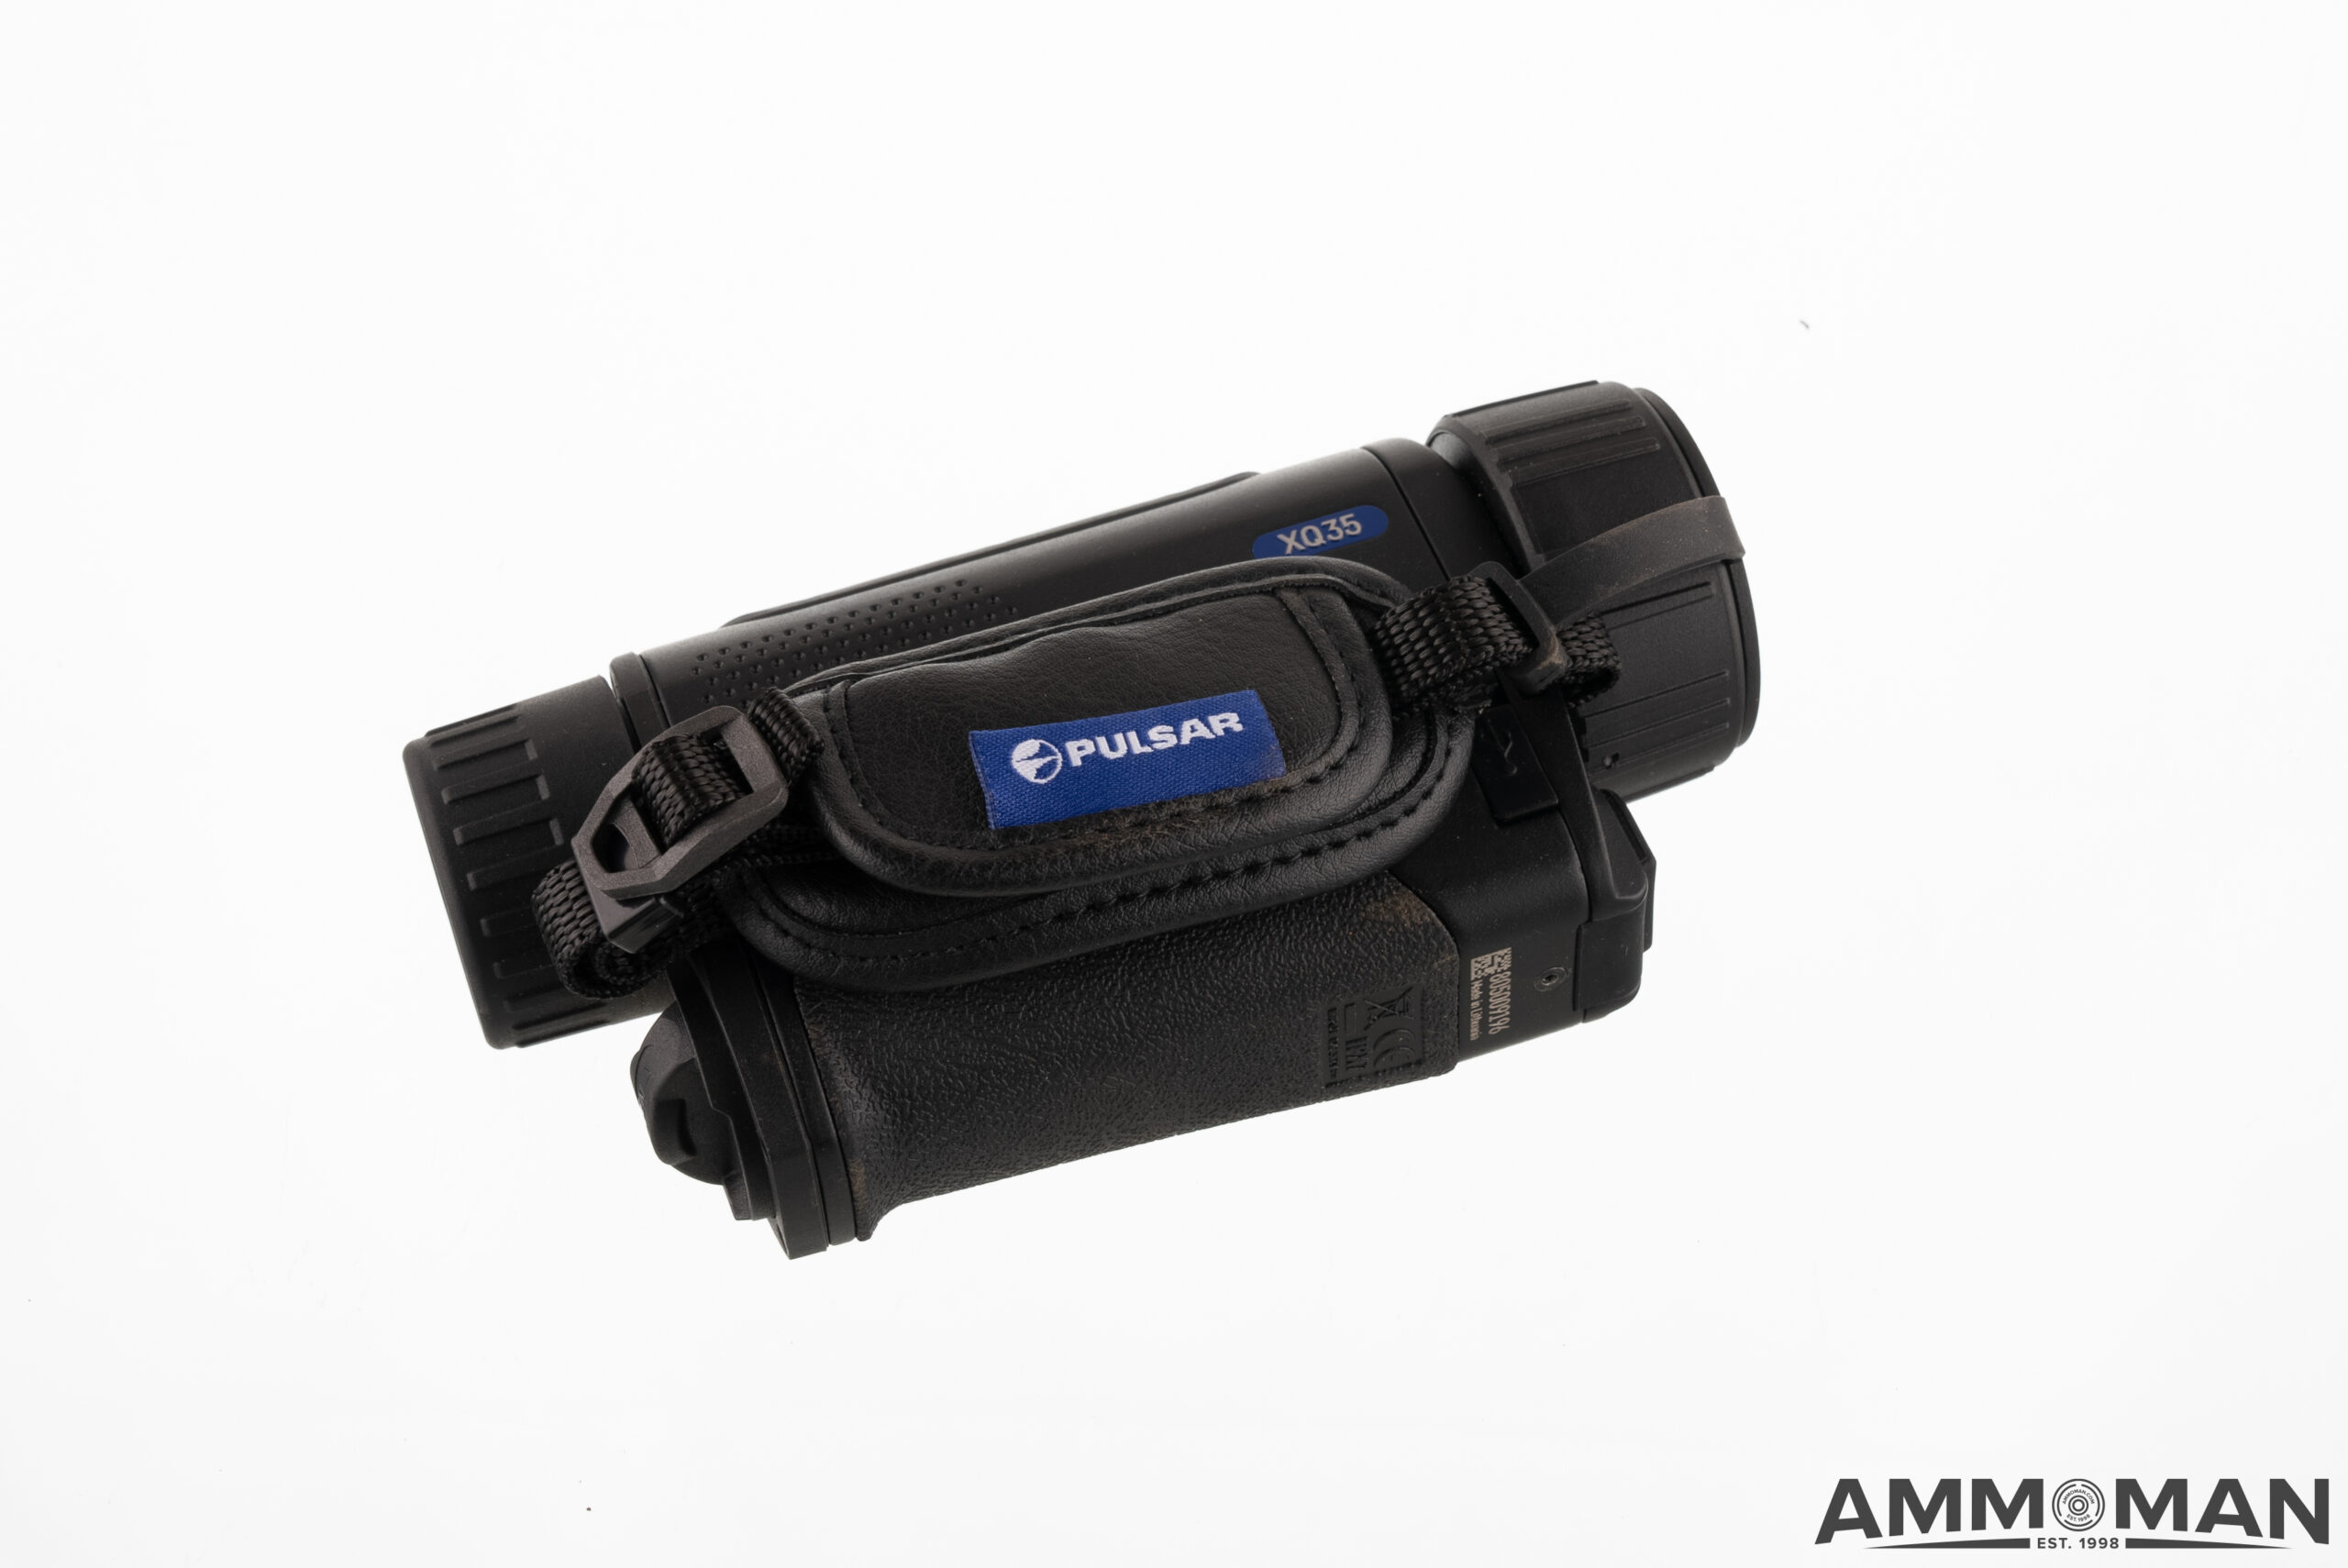 Pulsar hand held thermal device